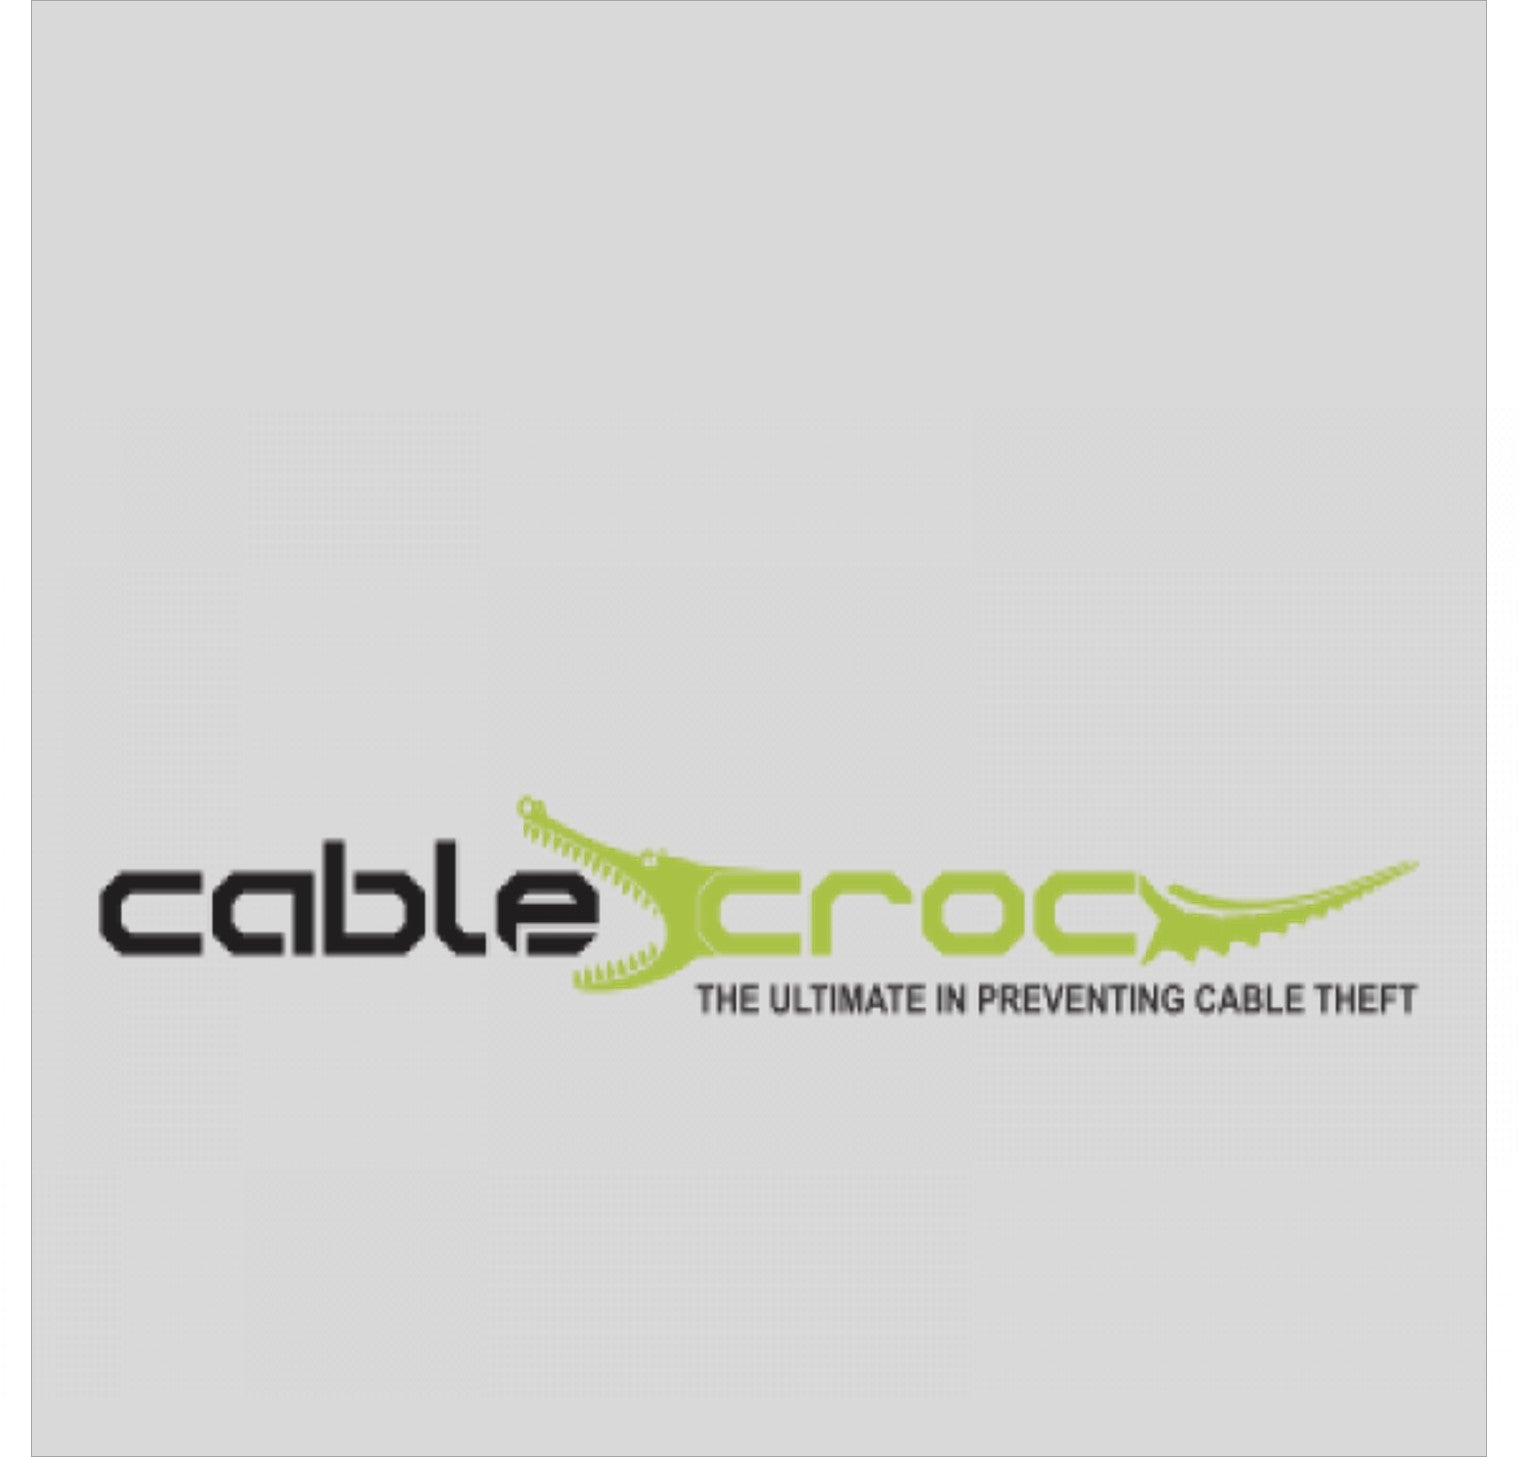 CABLE-CROC-RUGGED-CROC-is-designed-to-prevent-cable-theft-logo-trademark-image-black-green-on-grey